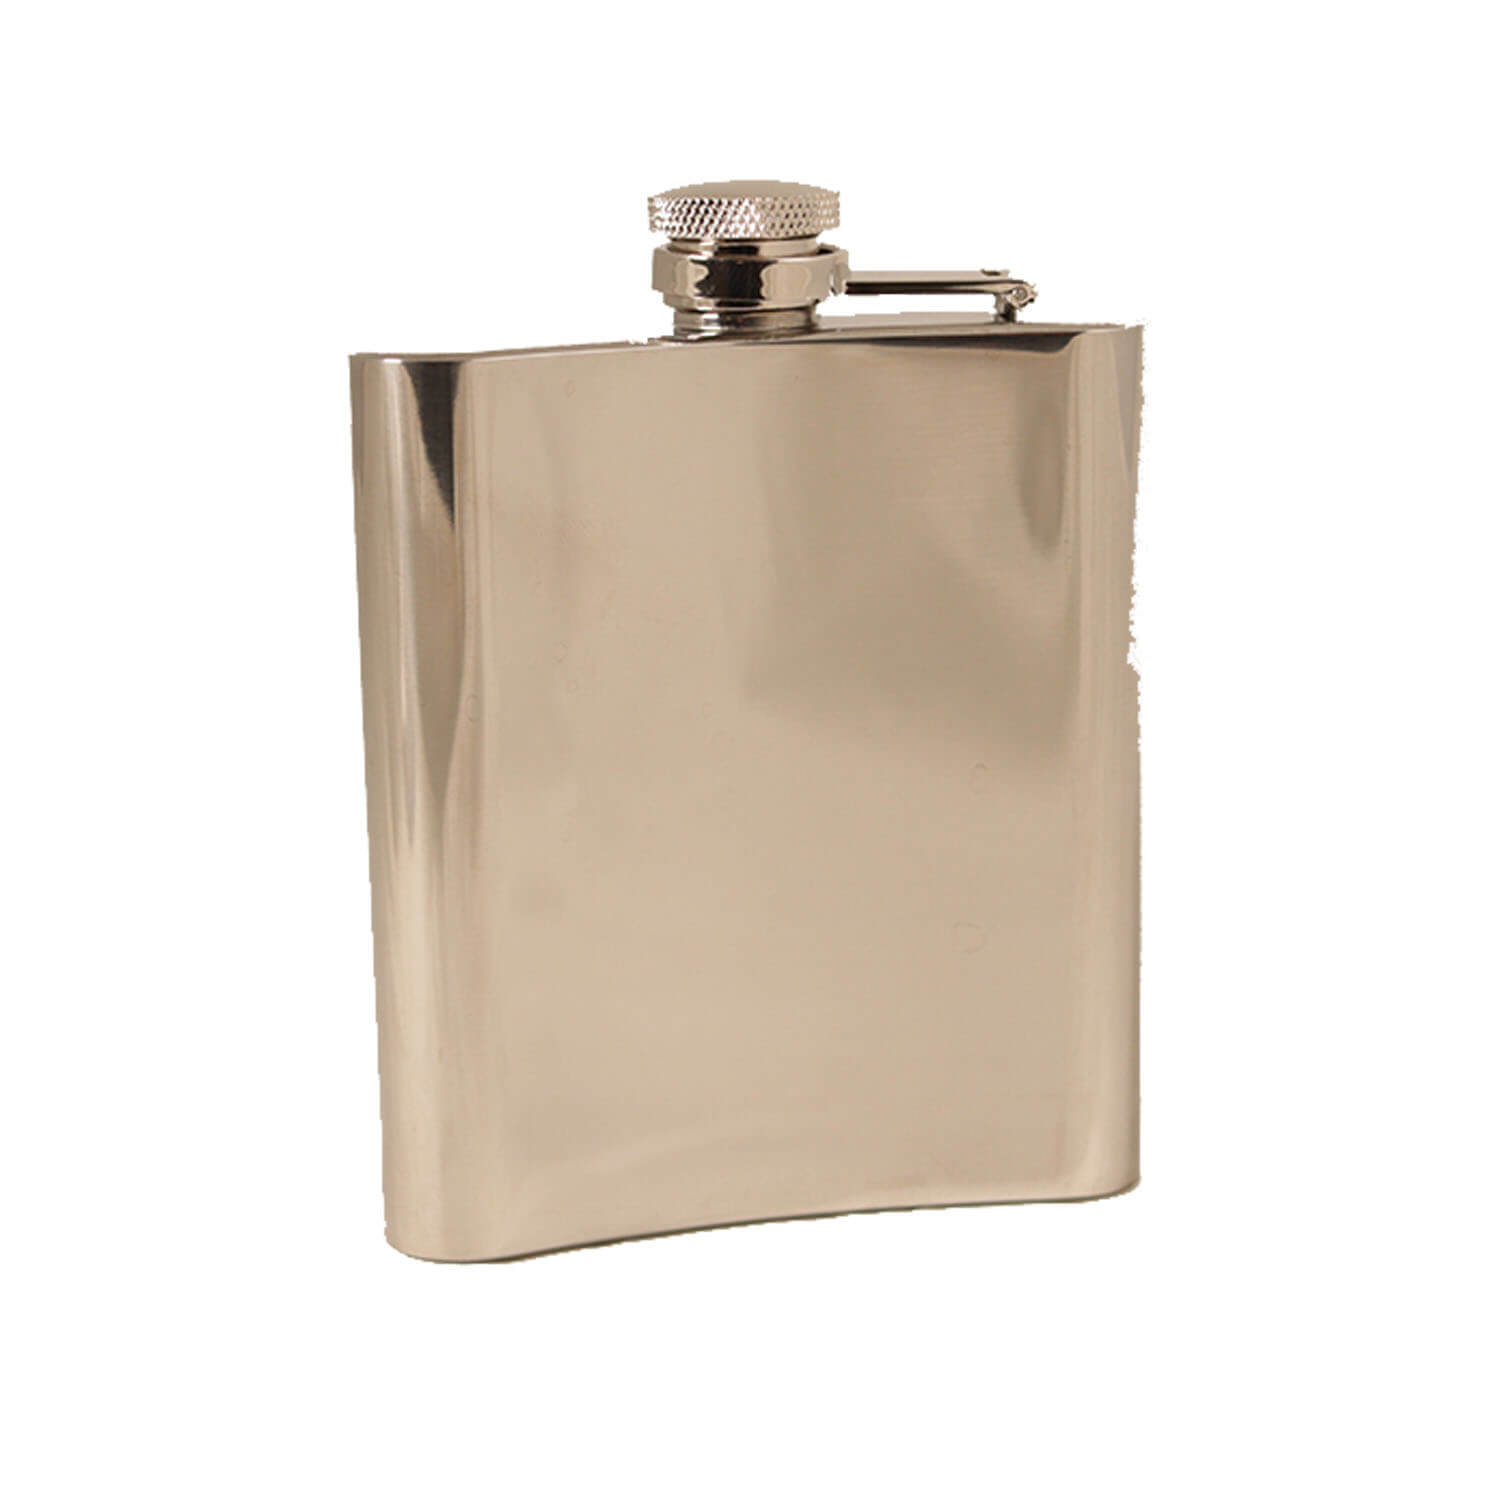 Mil-Tec Flask stainless steel 8 OZ - Outdoor Kitchen